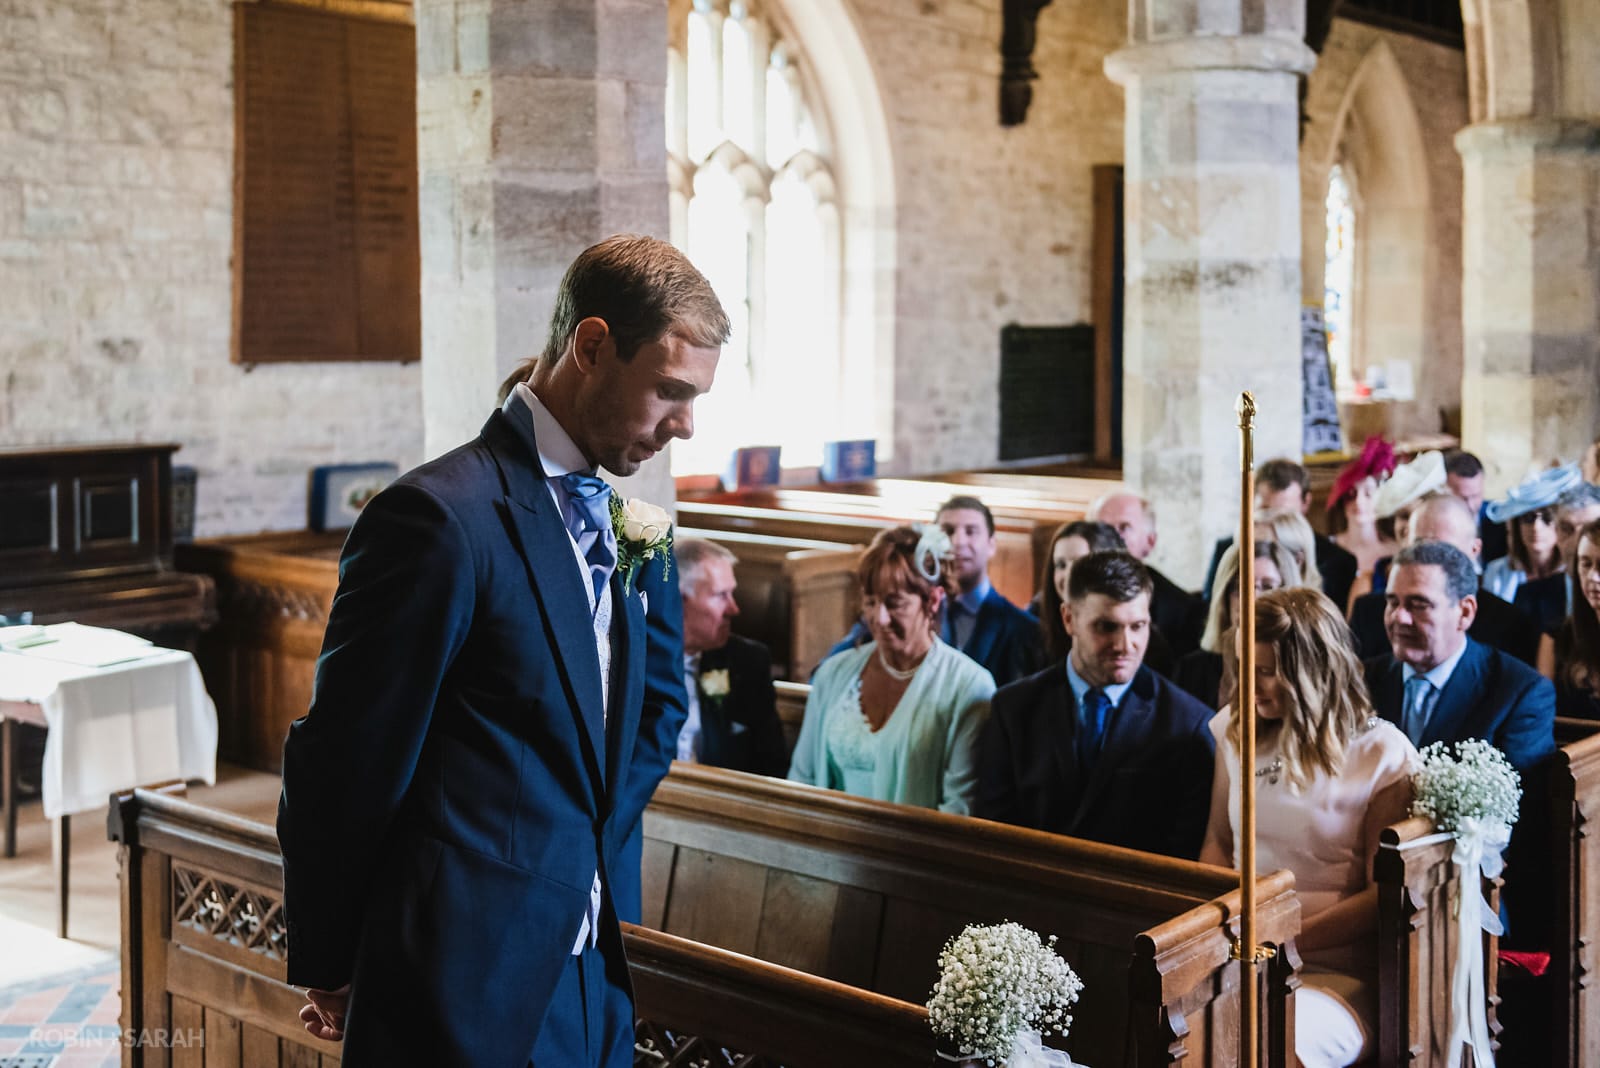 Groom waits in church for bride's arrival